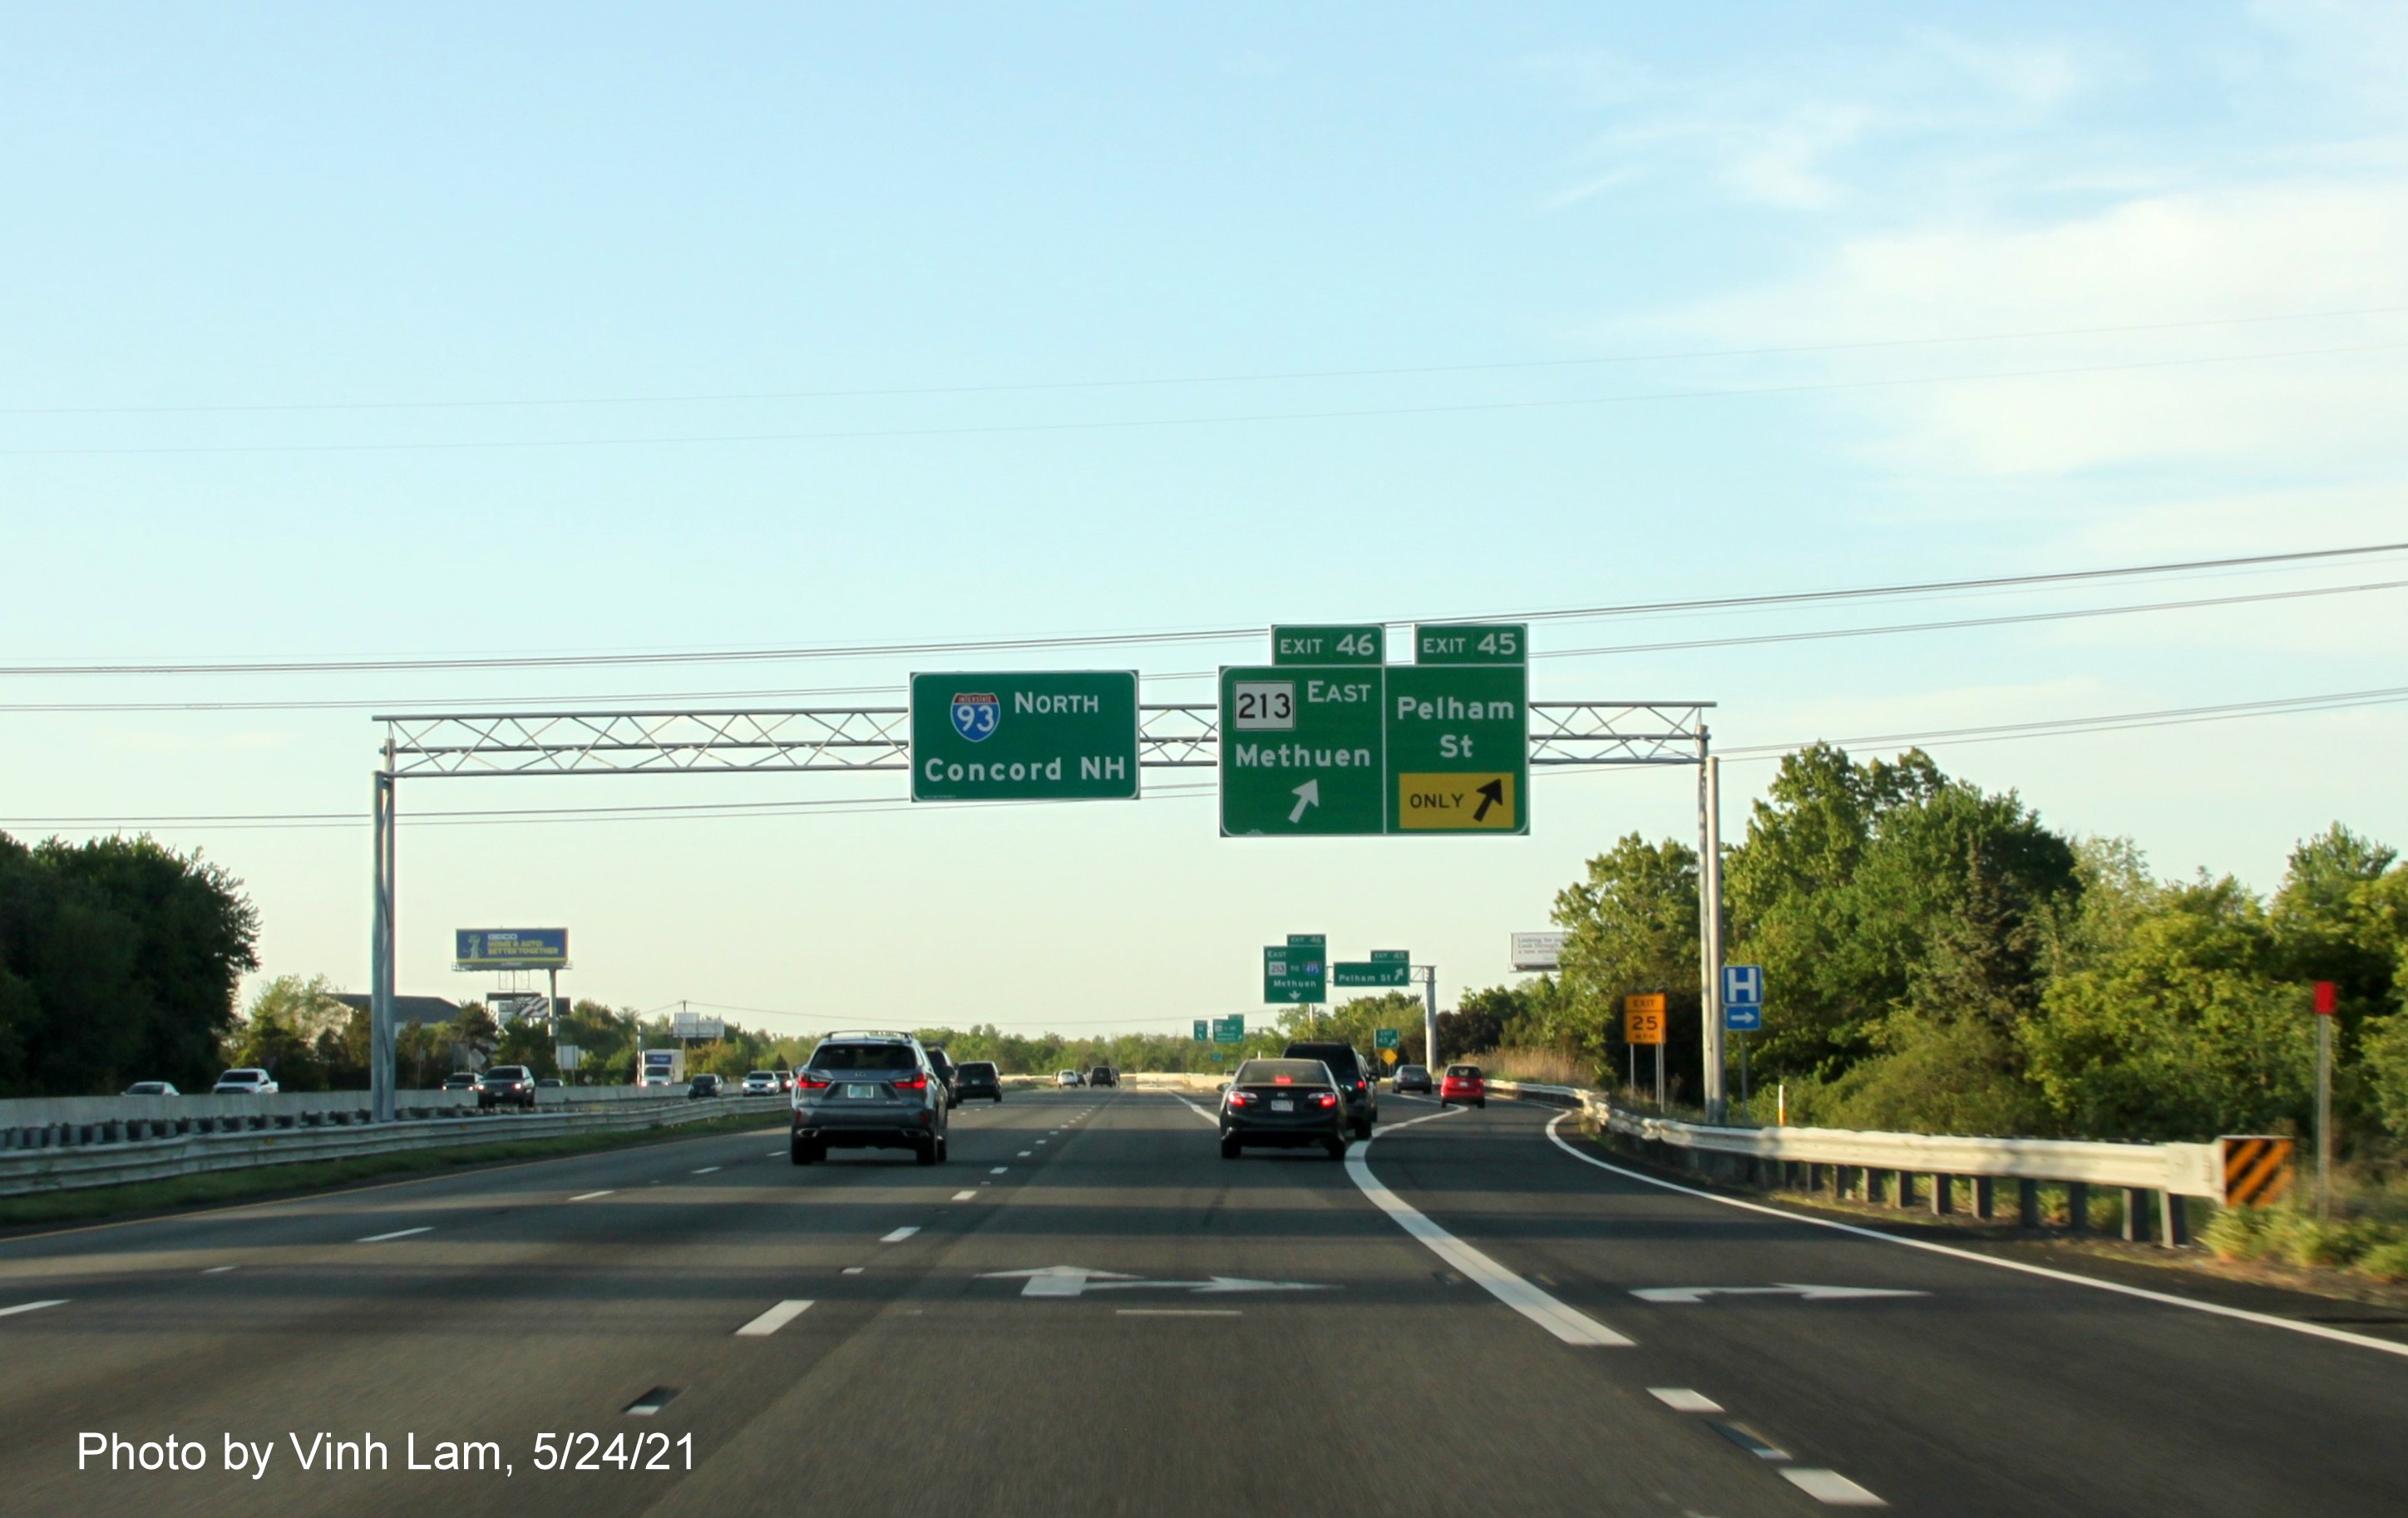 Image of overhead ramp signage at start of C/D ramp for Pelham Street and MA 213 exits with new milepost based exit numbers on I-93 North in Methuen, by Vinh Lam, May 2021